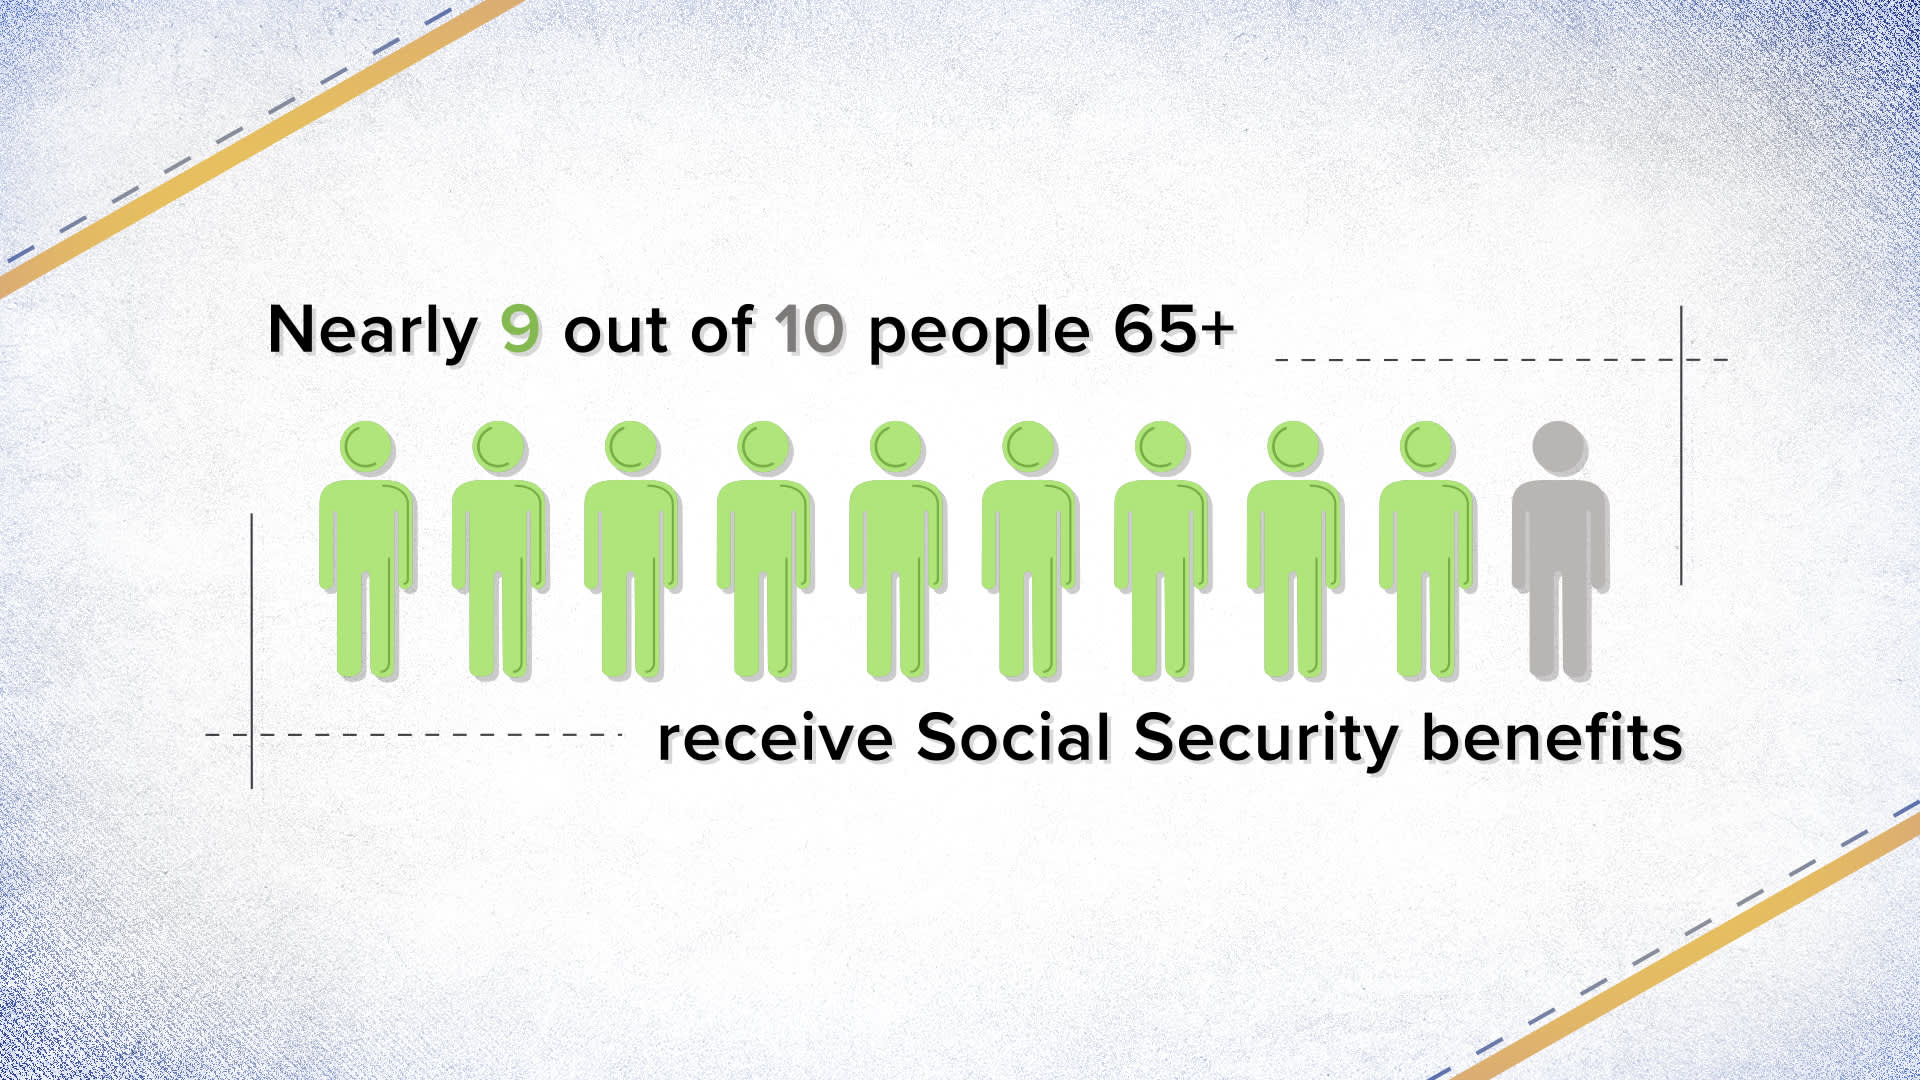 How much to expect from Social Security if you make 50,000